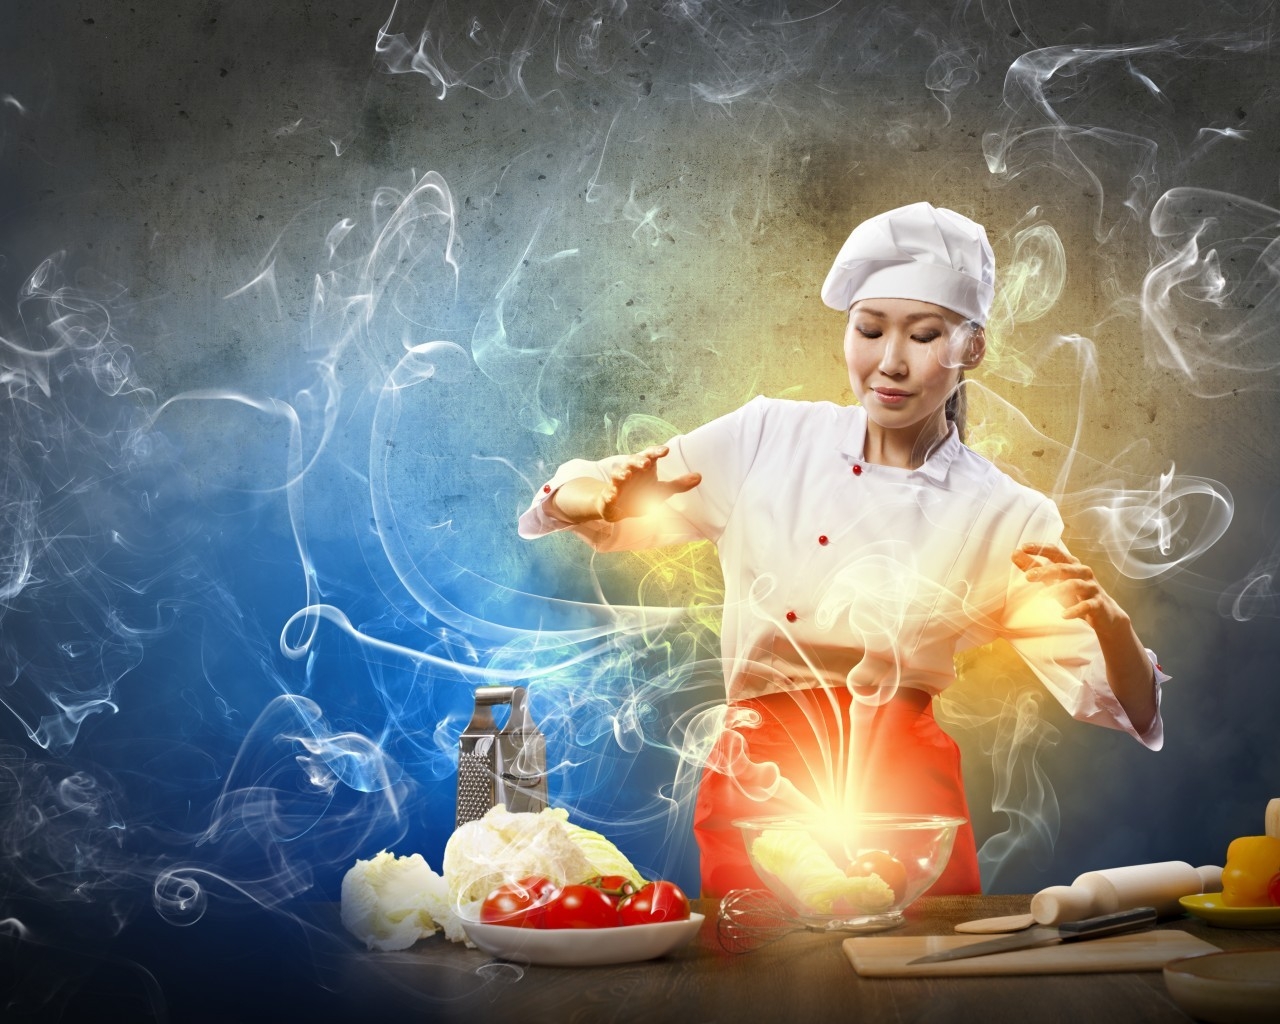 Creative Asian Chef for 1280 x 1024 resolution